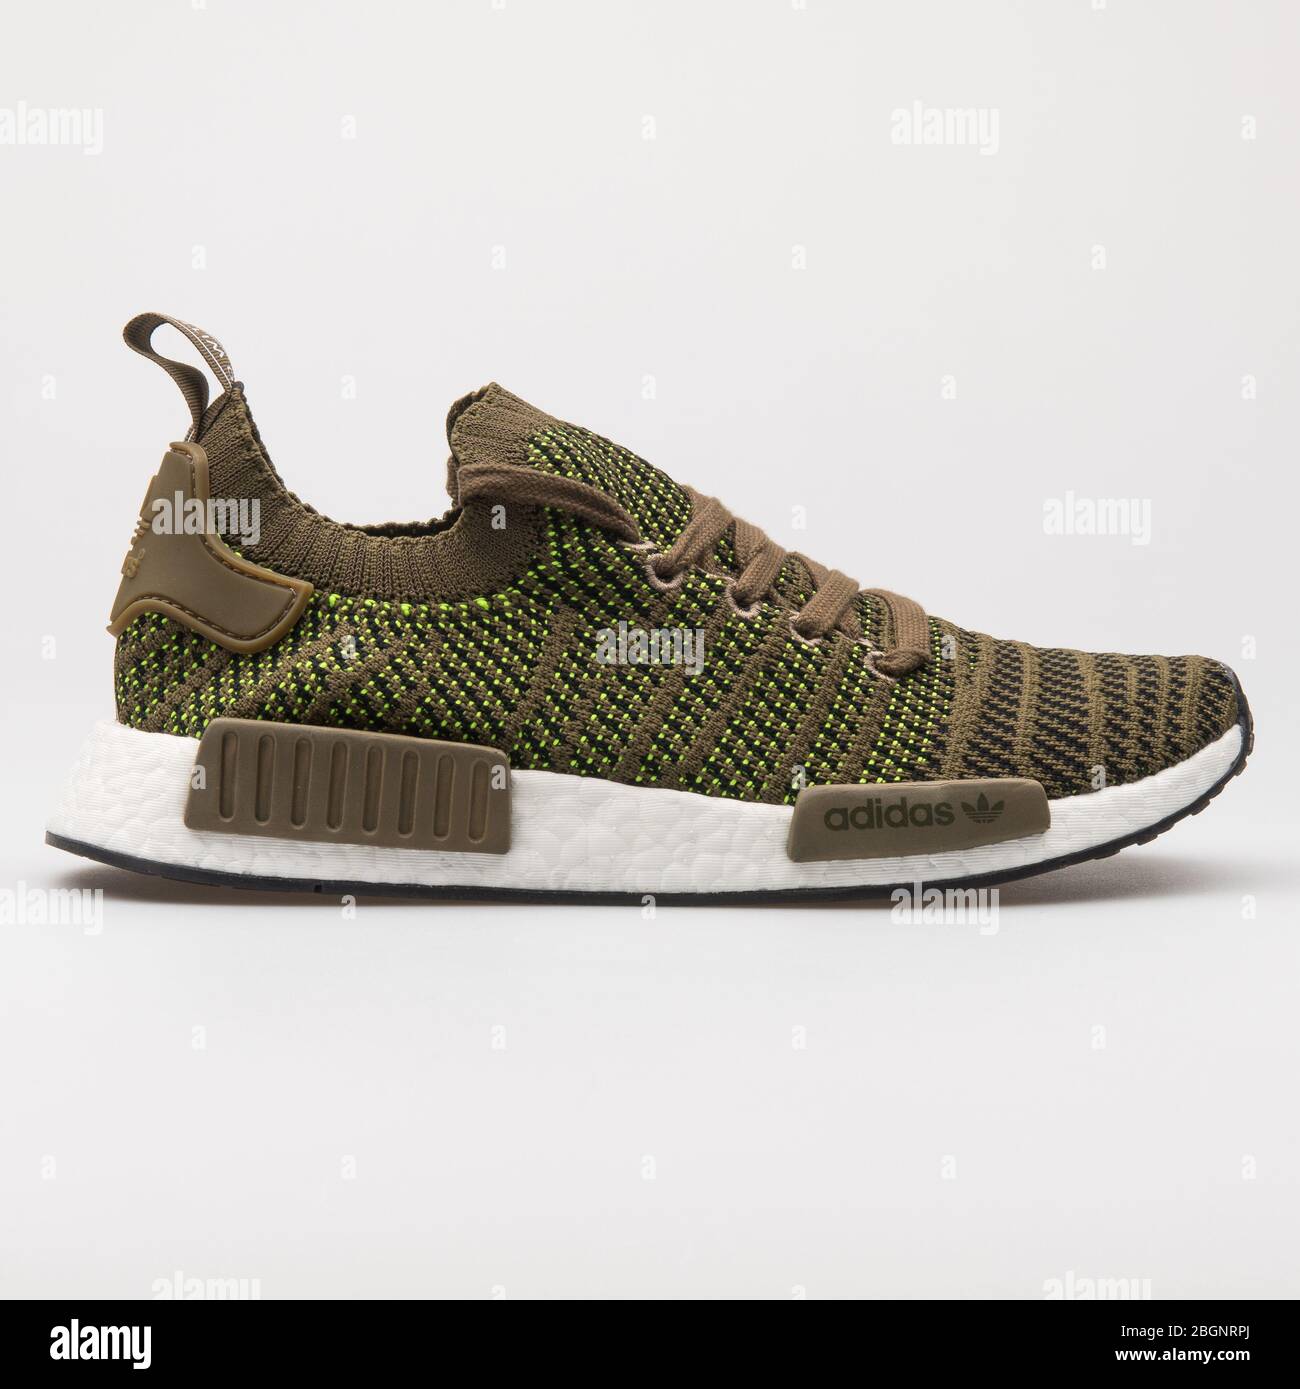 VIENNA, AUSTRIA - AUGUST 24, 2017: Adidas NMD R1 olive green sneaker on  white background Stock Photo - Alamy